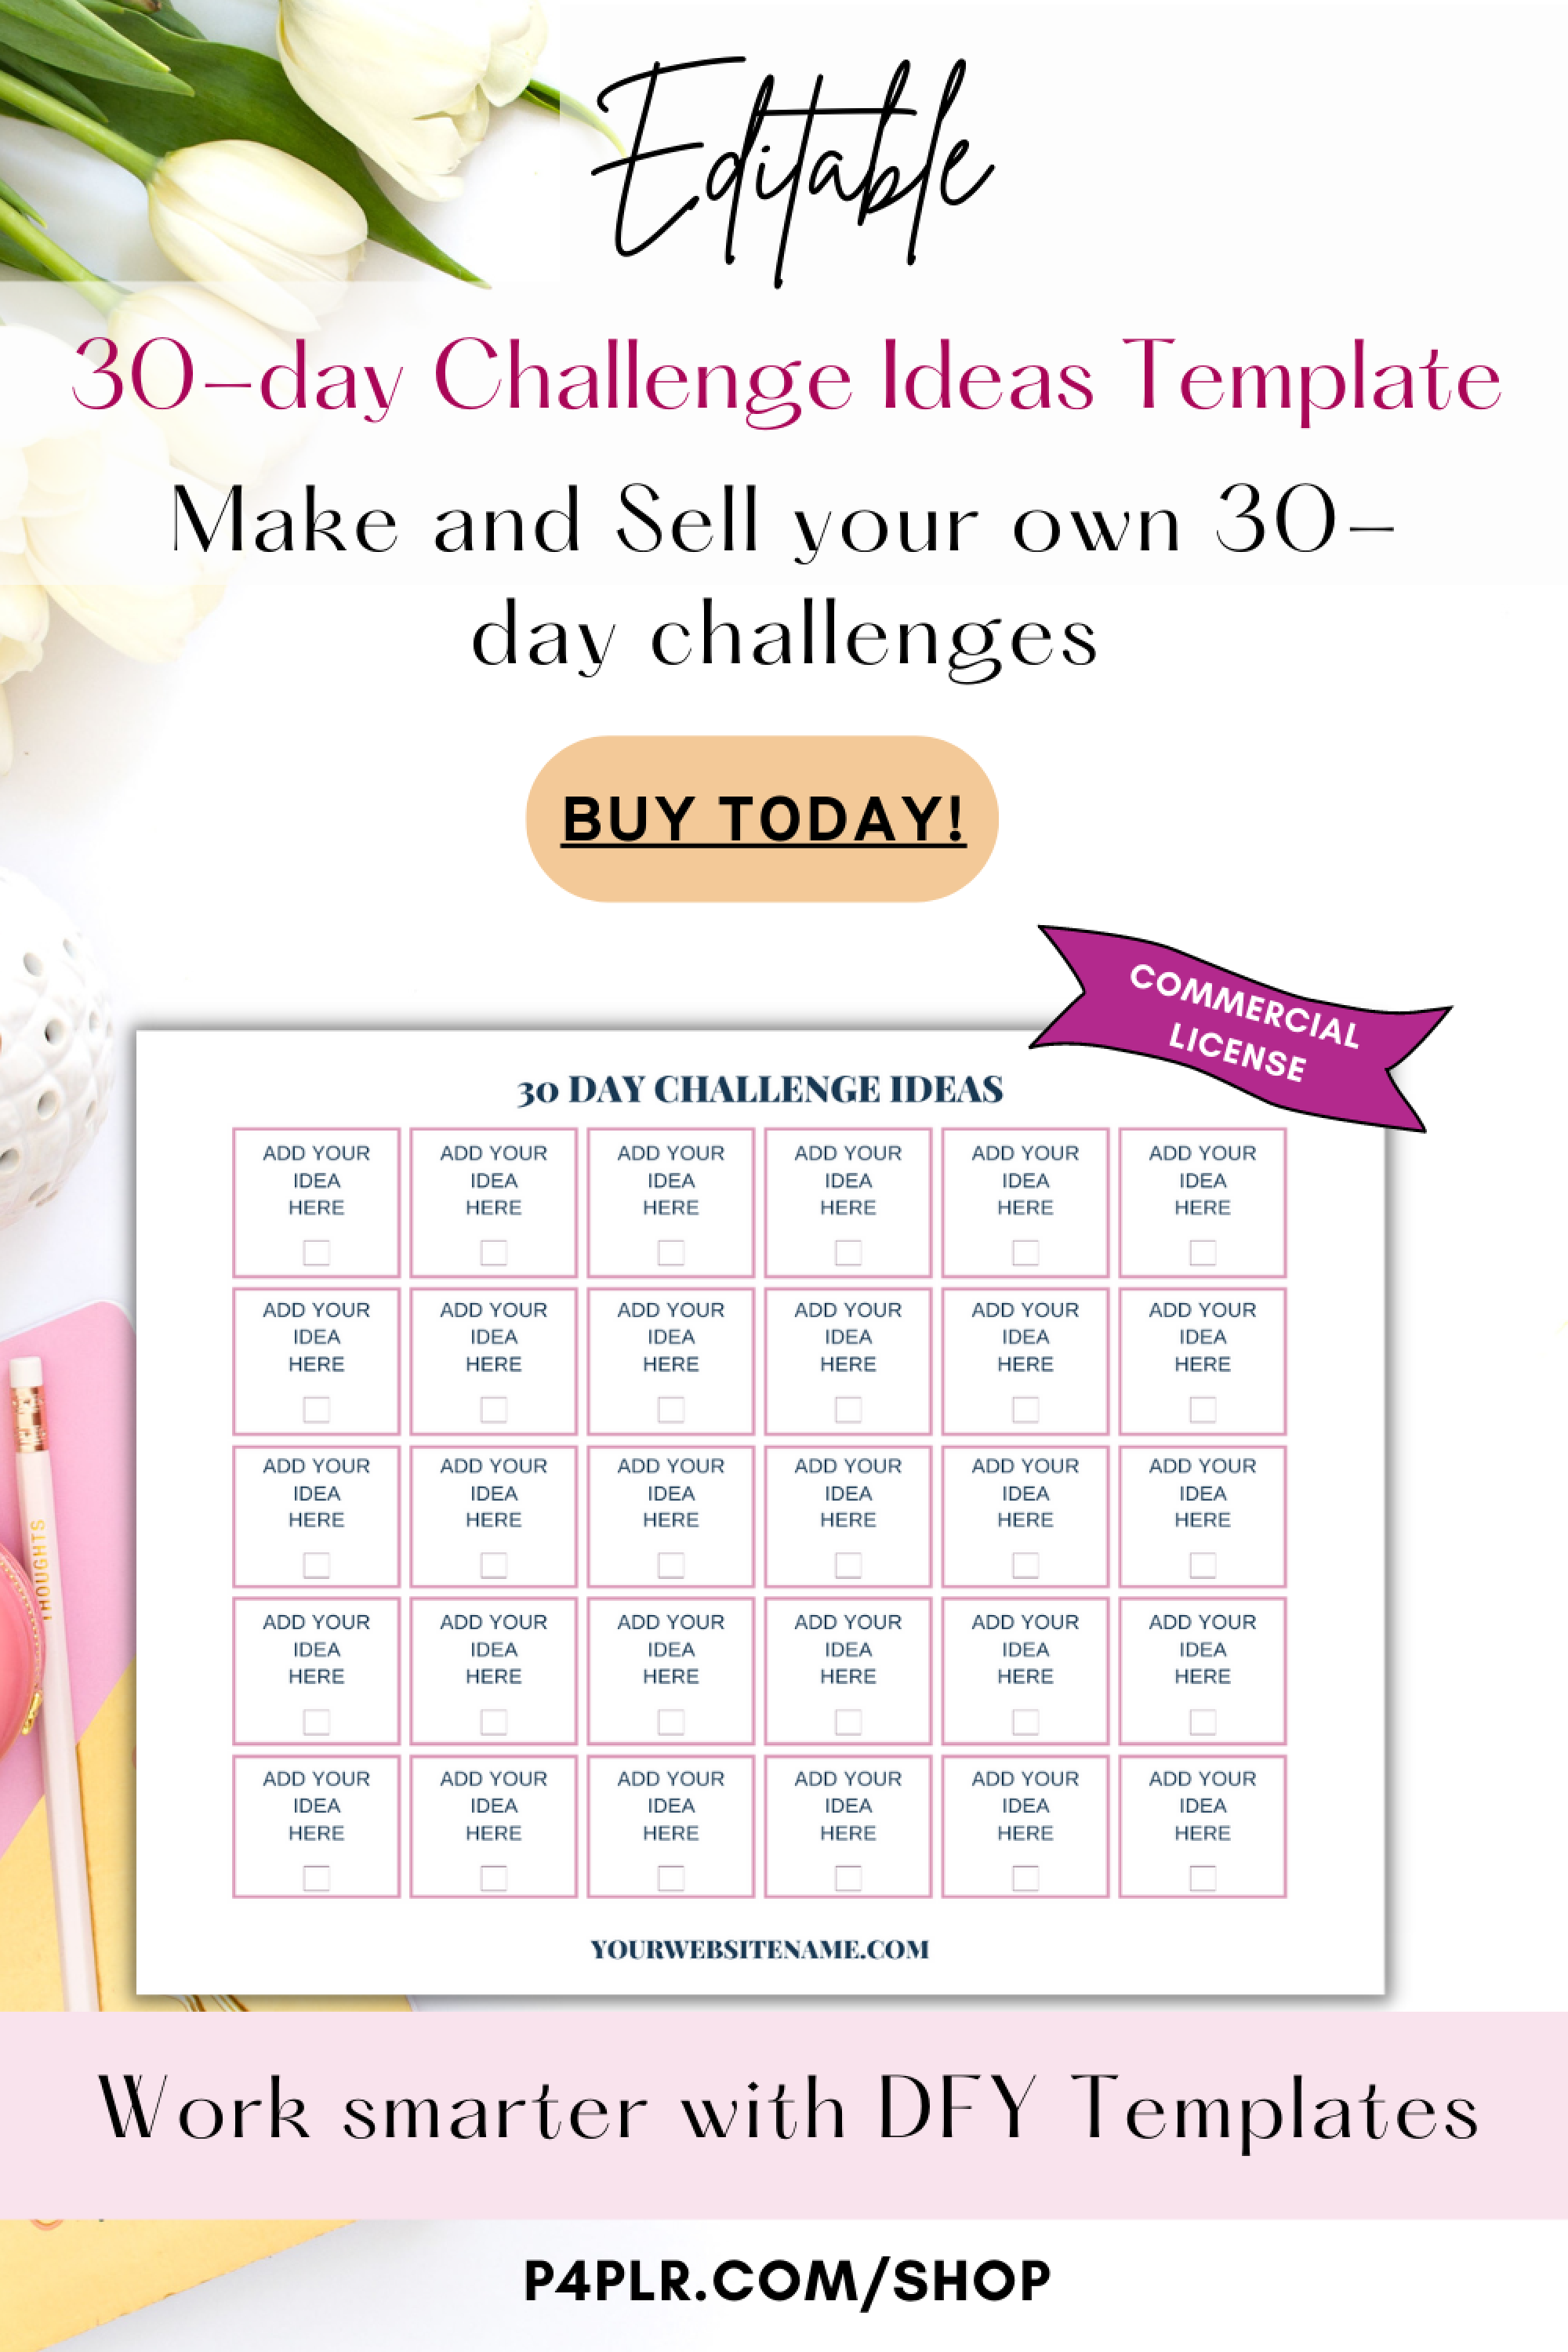 30 day Challenges Ideas Template in Pink- PLR Printable